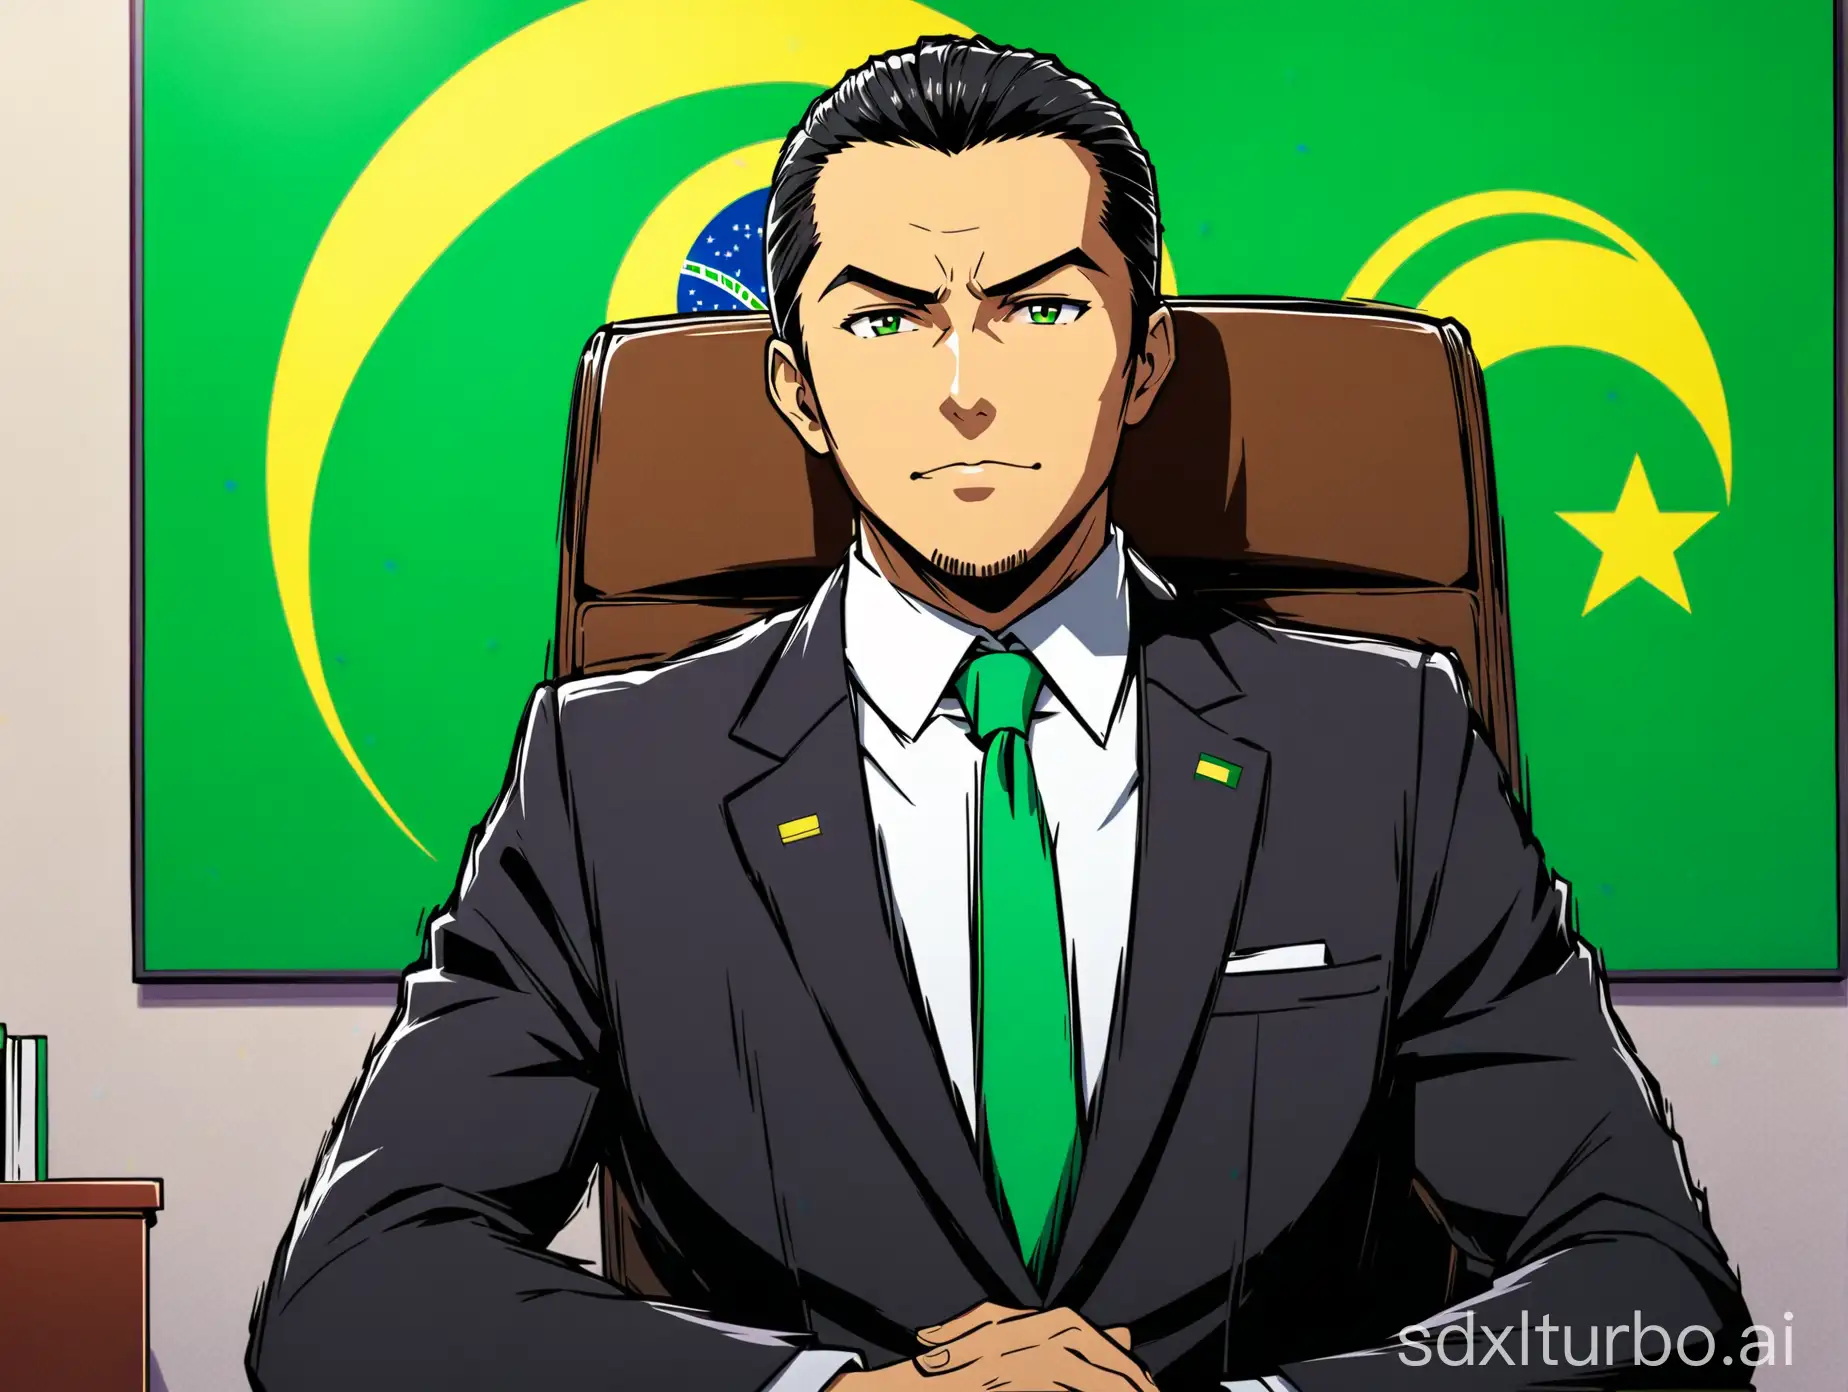 A 30-year-old man in a well-dressed suit sitting in a chair in front of an office desk with a Brazilian flag hanging behind him on the wall. It seems like he is the president of Brazil. All in anime form.